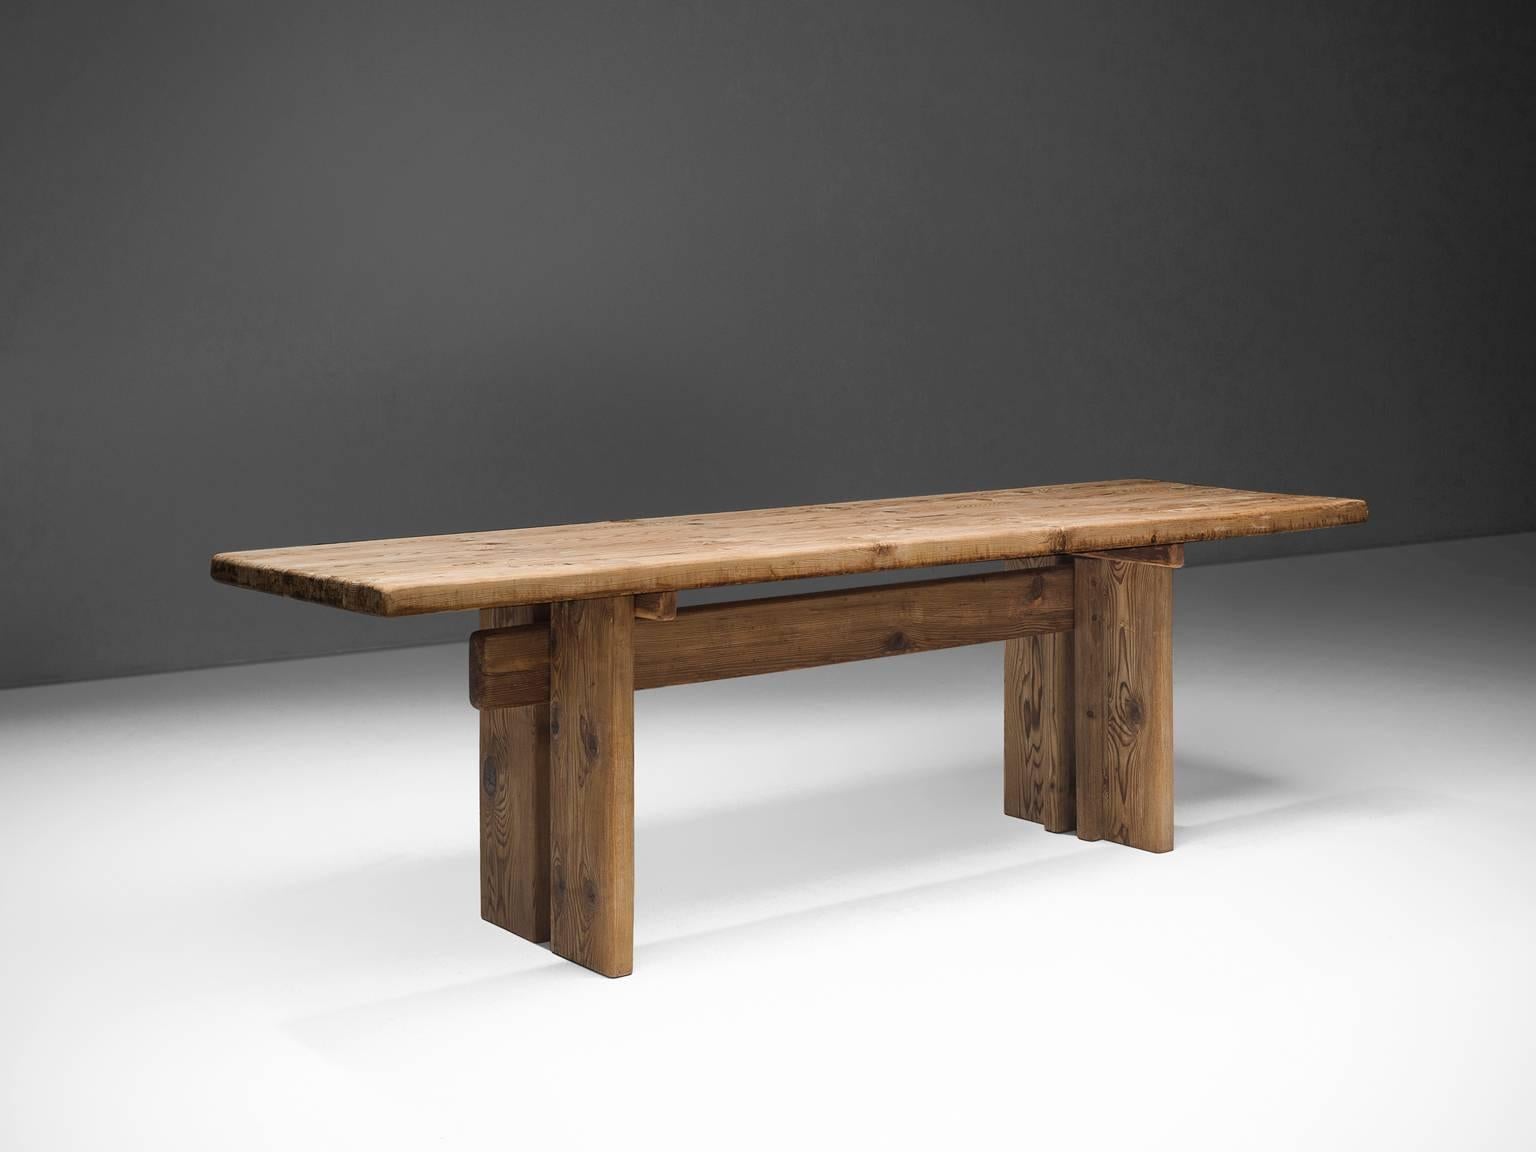 Dining table in pine wood, France, circa 1950. 

This pine table is robust and architectural in its design. The bulky piece is made of beautiful pine wood which developed a nice, rustic patina through age and use. The traditional wooden